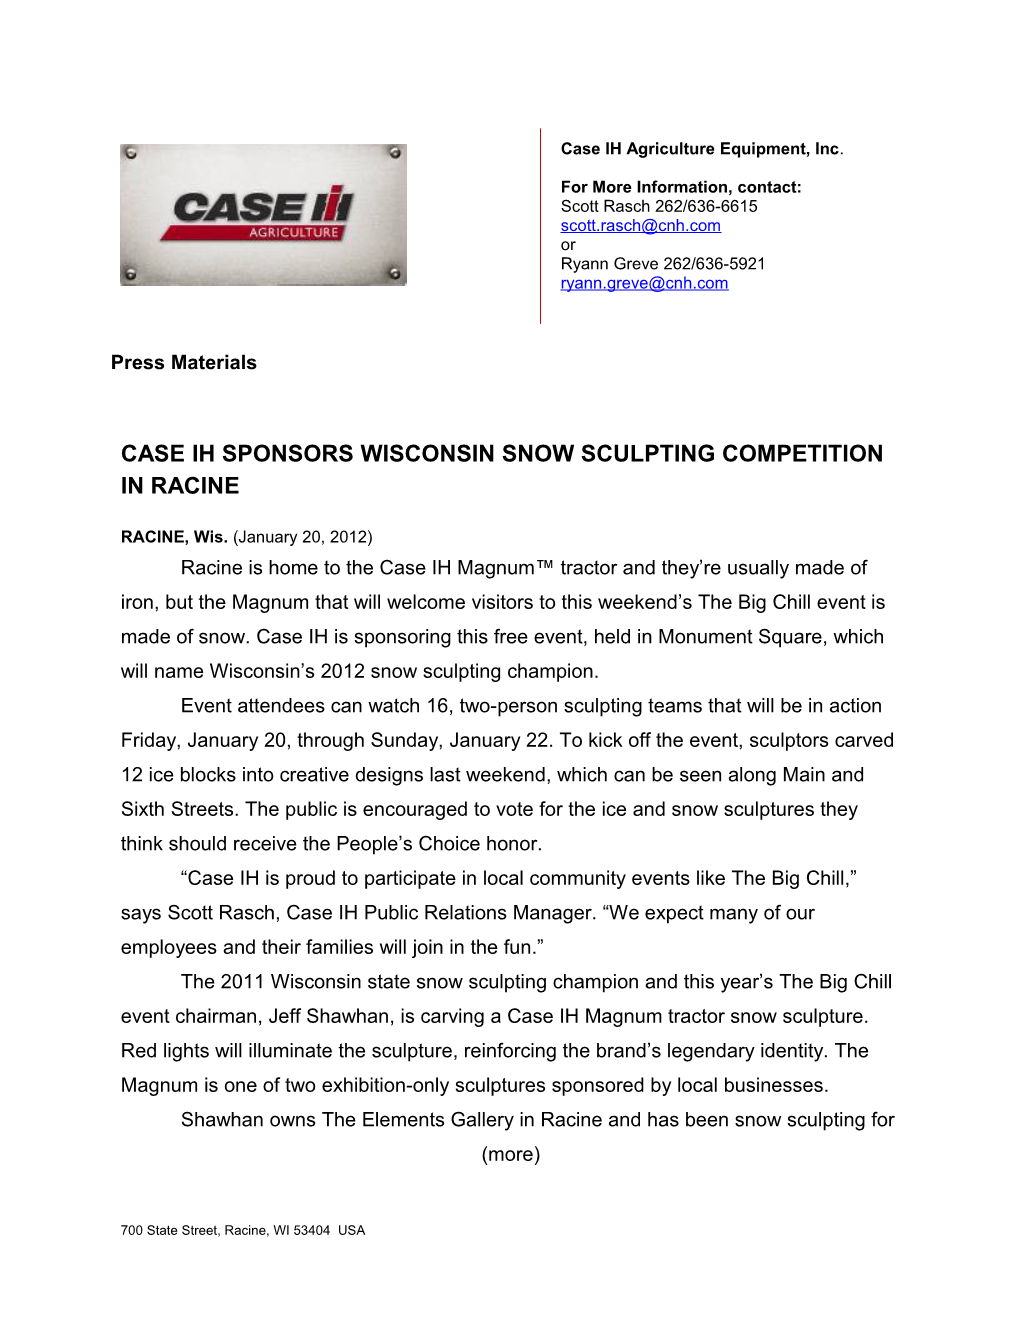 Case IH Sponsors Wisconsin Snow Sculpting Competition Word Document